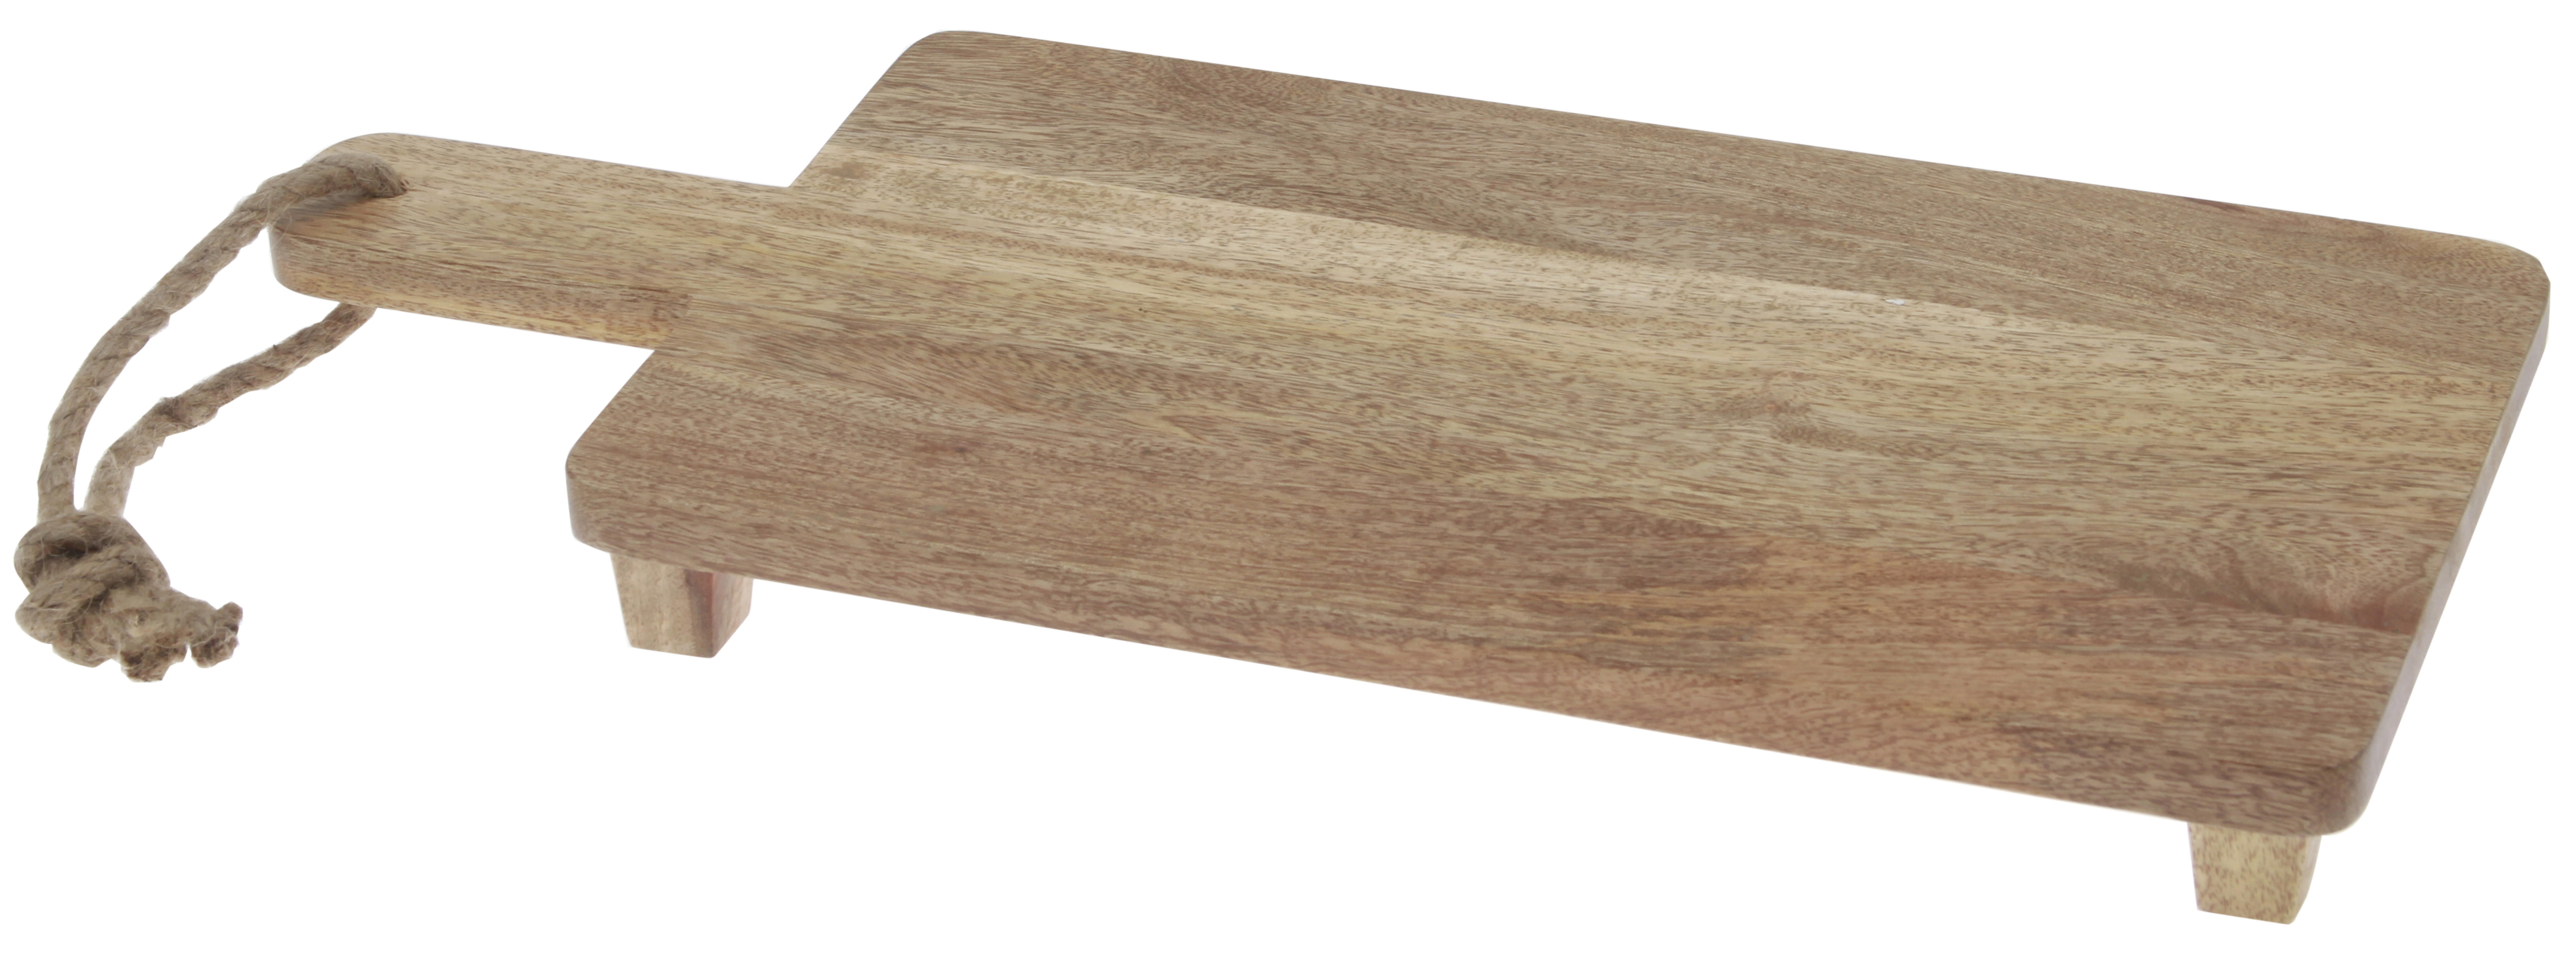 Thirstystone NMCGT30 Serving Board Multicolor